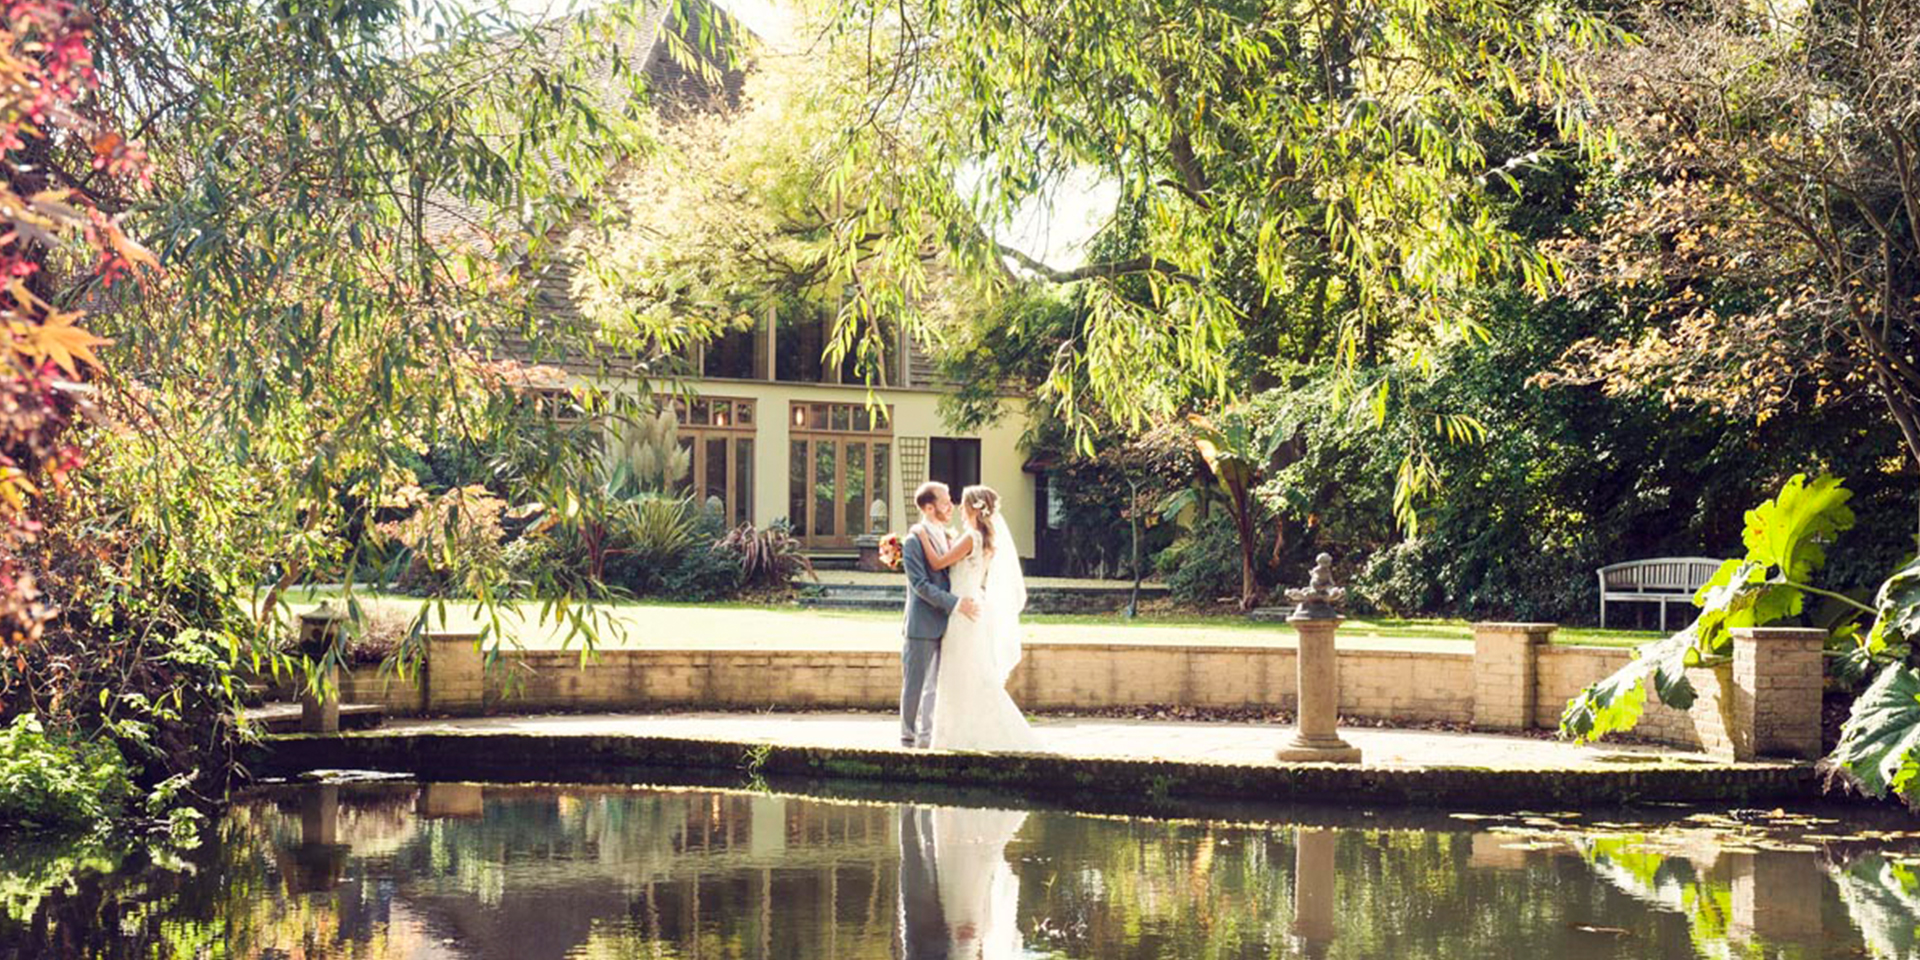 Hayley and Oliver held their breathtaking autumn wedding at one of Hampshire’s finest wedding venues